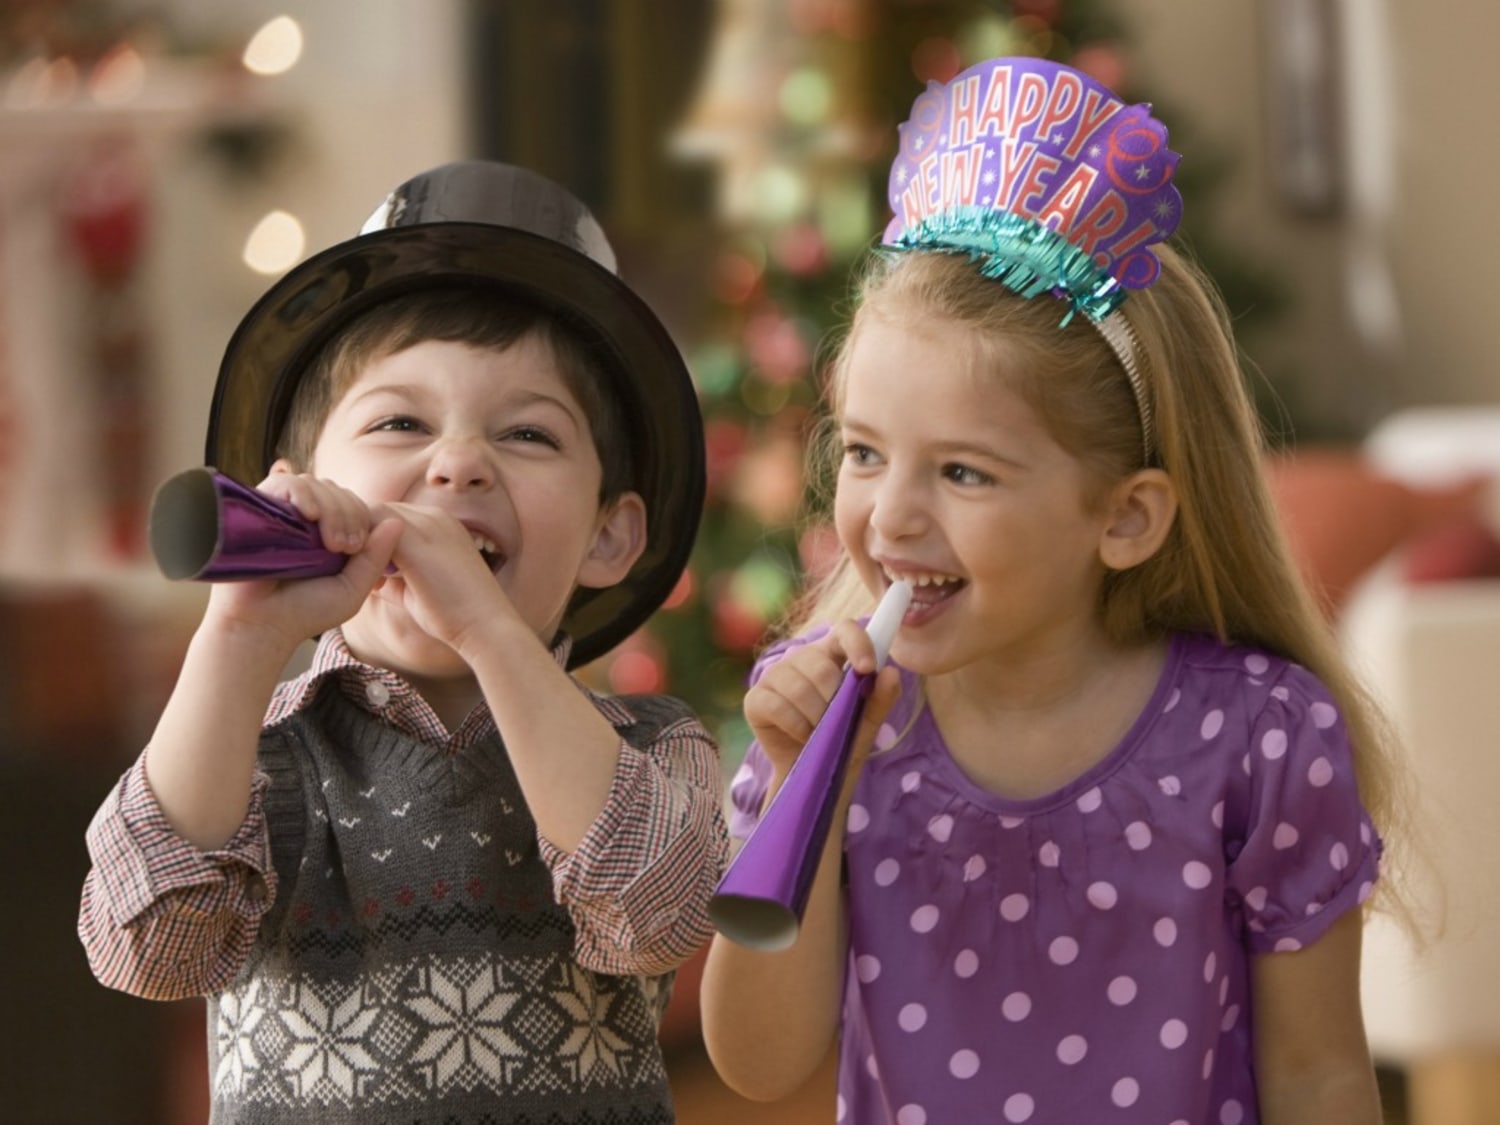 New Year'S Eve Outfit Ideas For Him, Her And The Kids